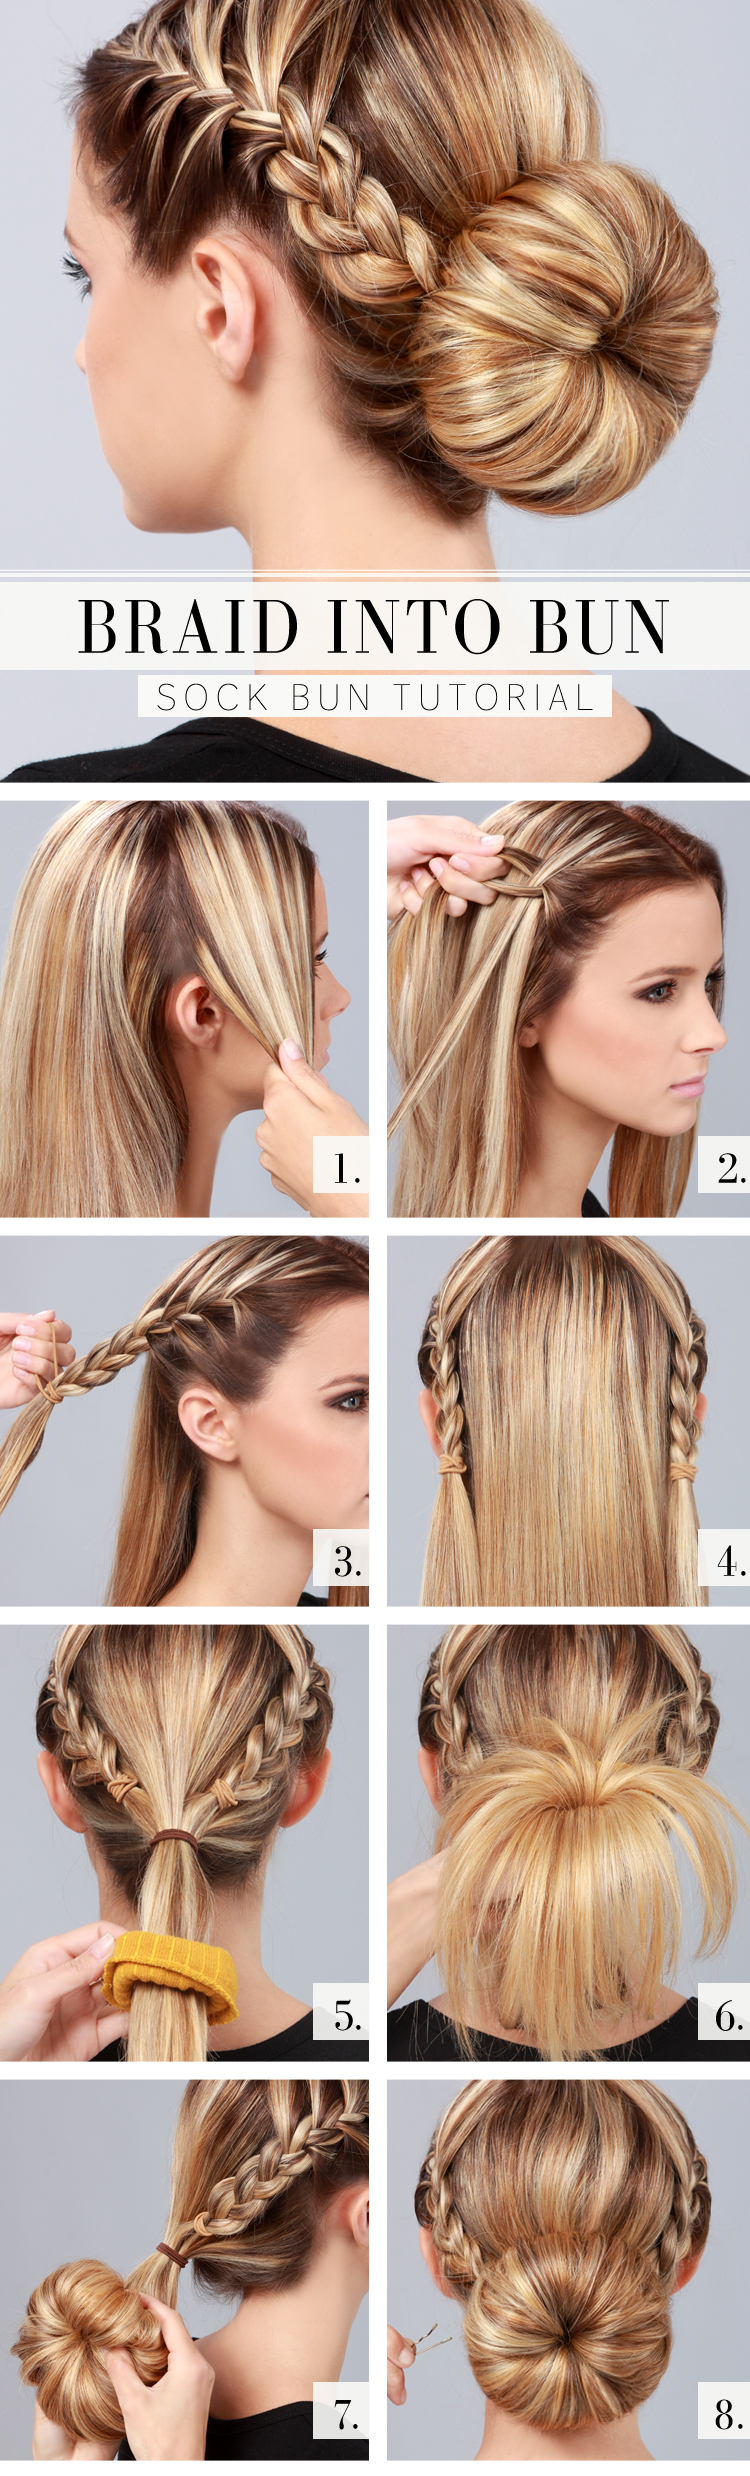 Top 10 Hairstyle Tutorials for Summer - Pretty Designs